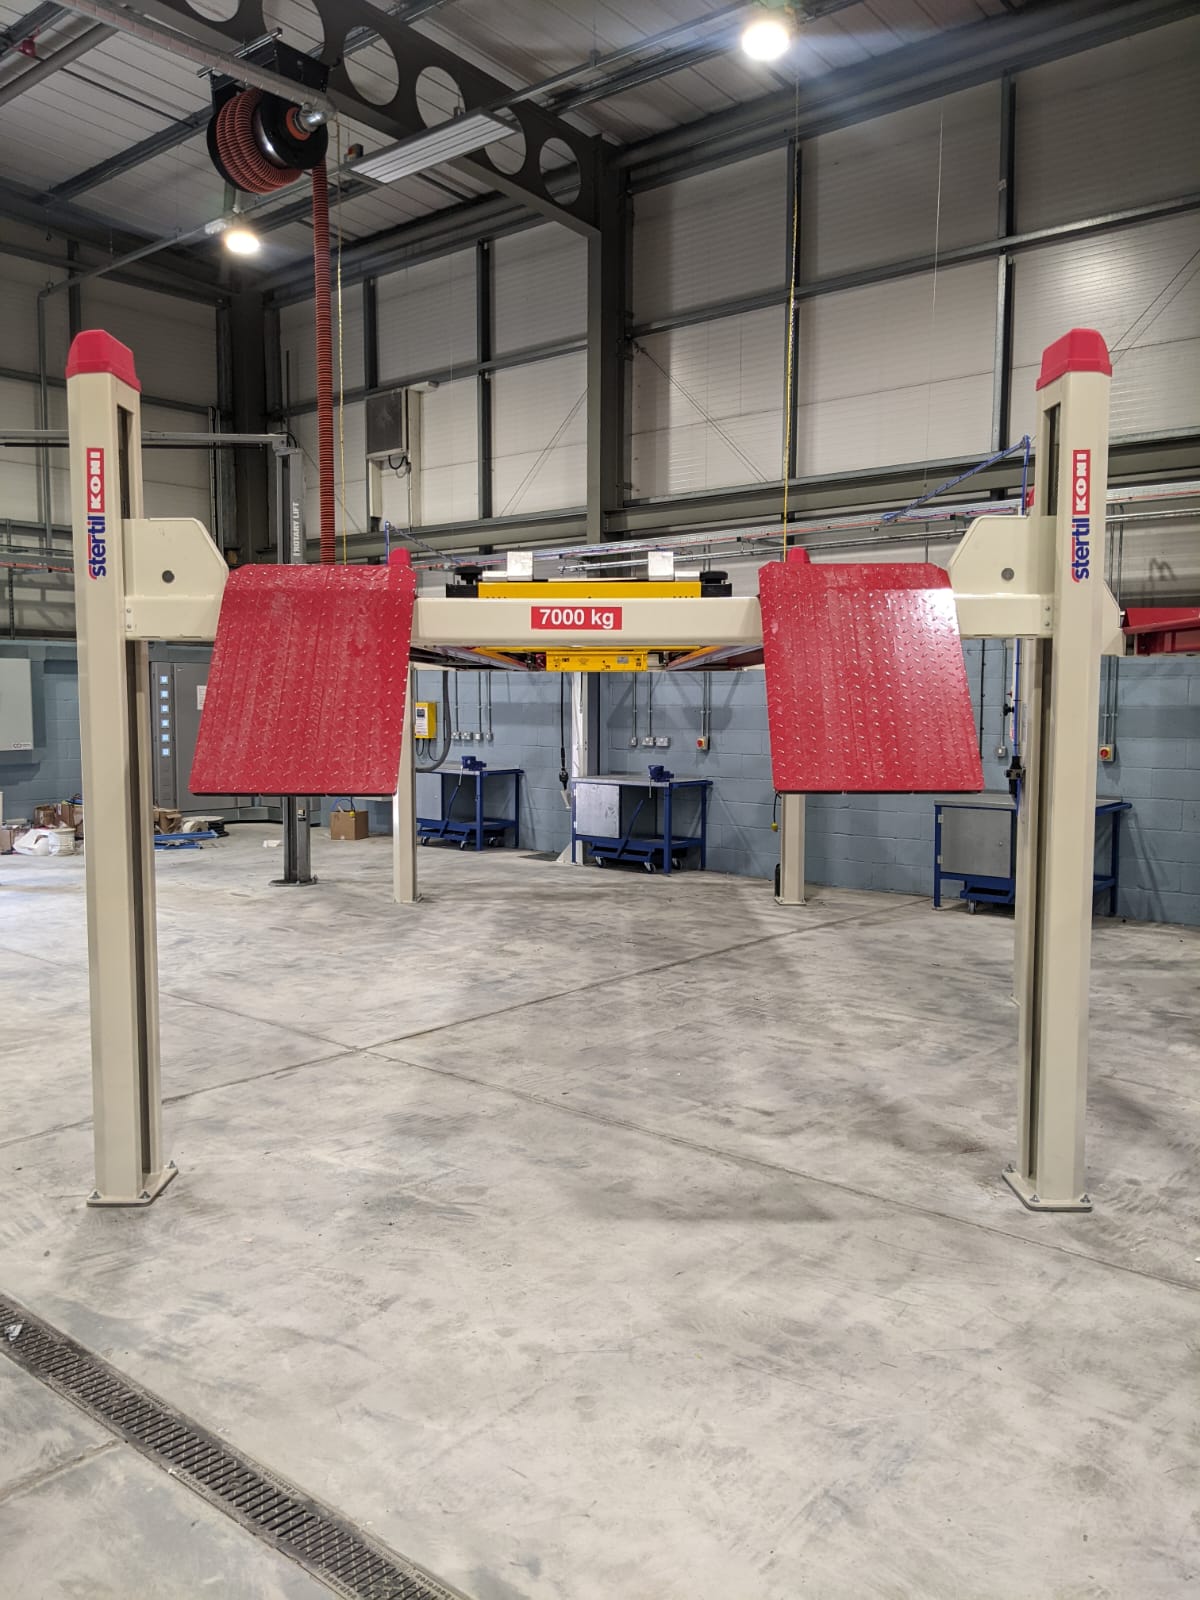 Reliable commercial vehicle lift and lift mounted jacking beam